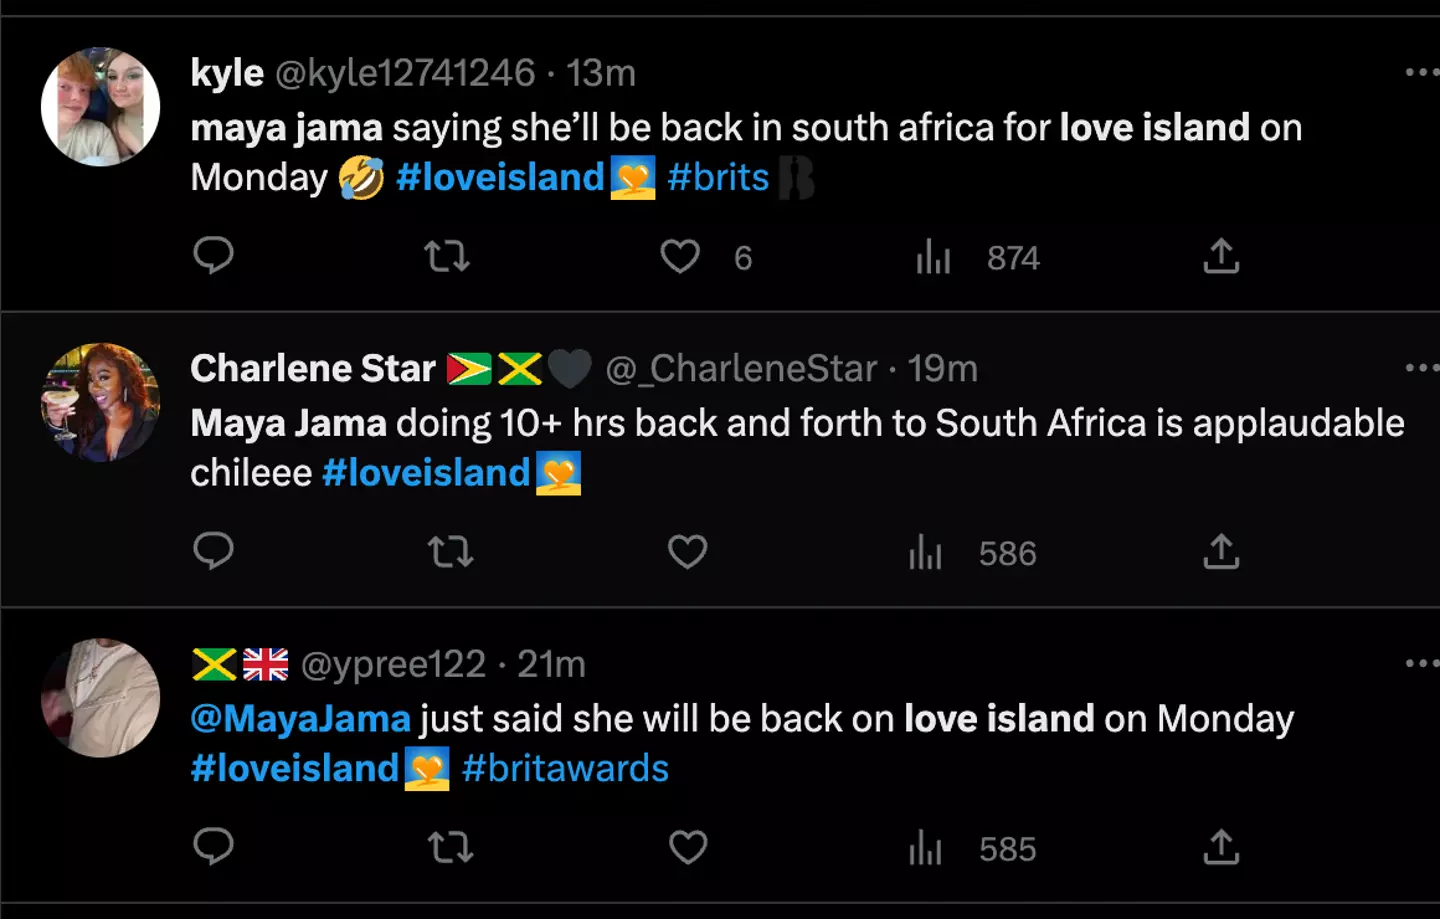 Love Island fans were thrilled with the accidental news.